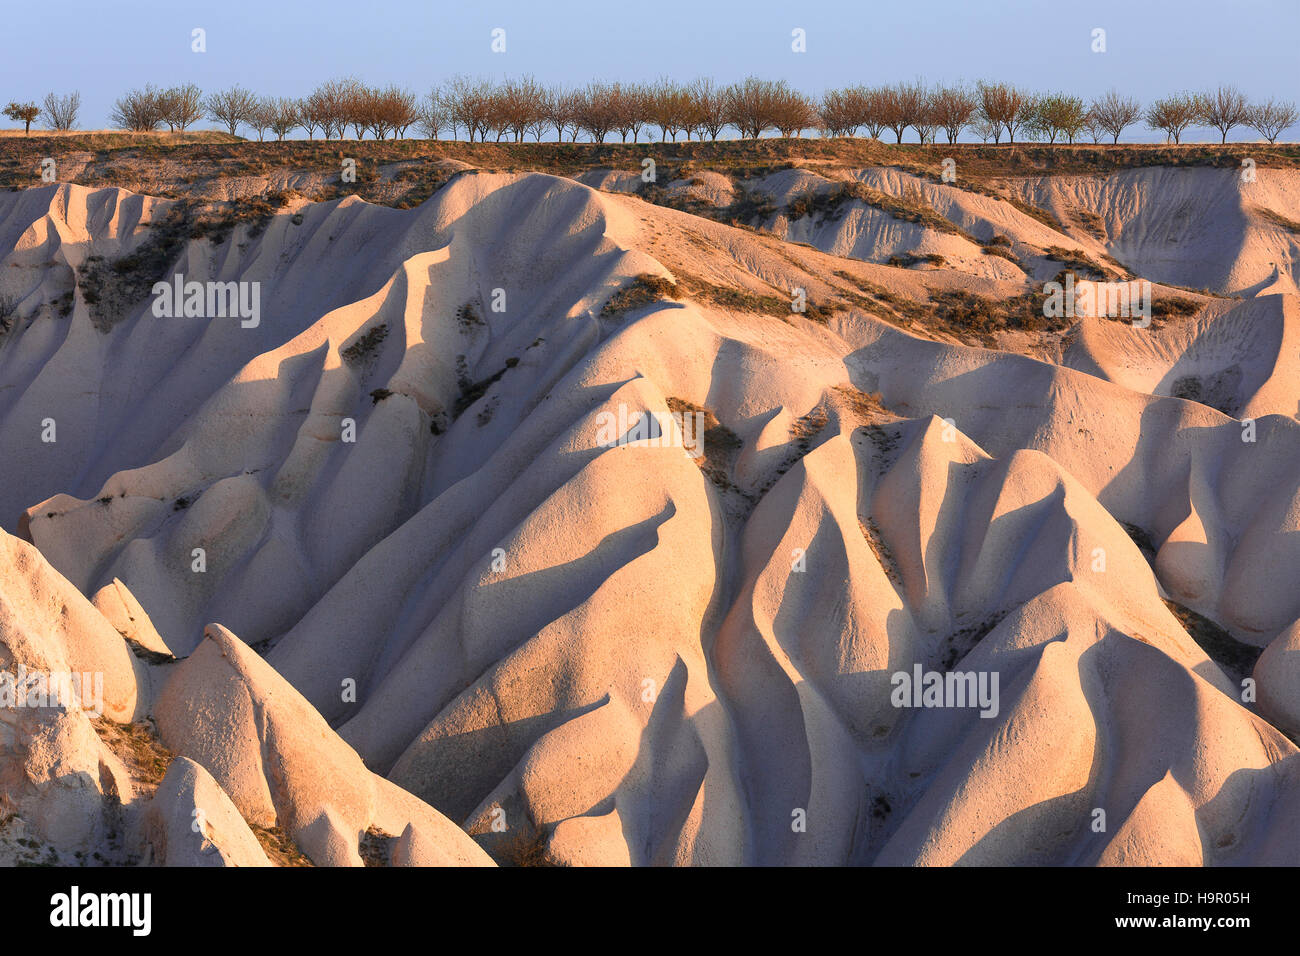 Geological formations looking sand dunes in Cappadocia in Turkey Stock Photo